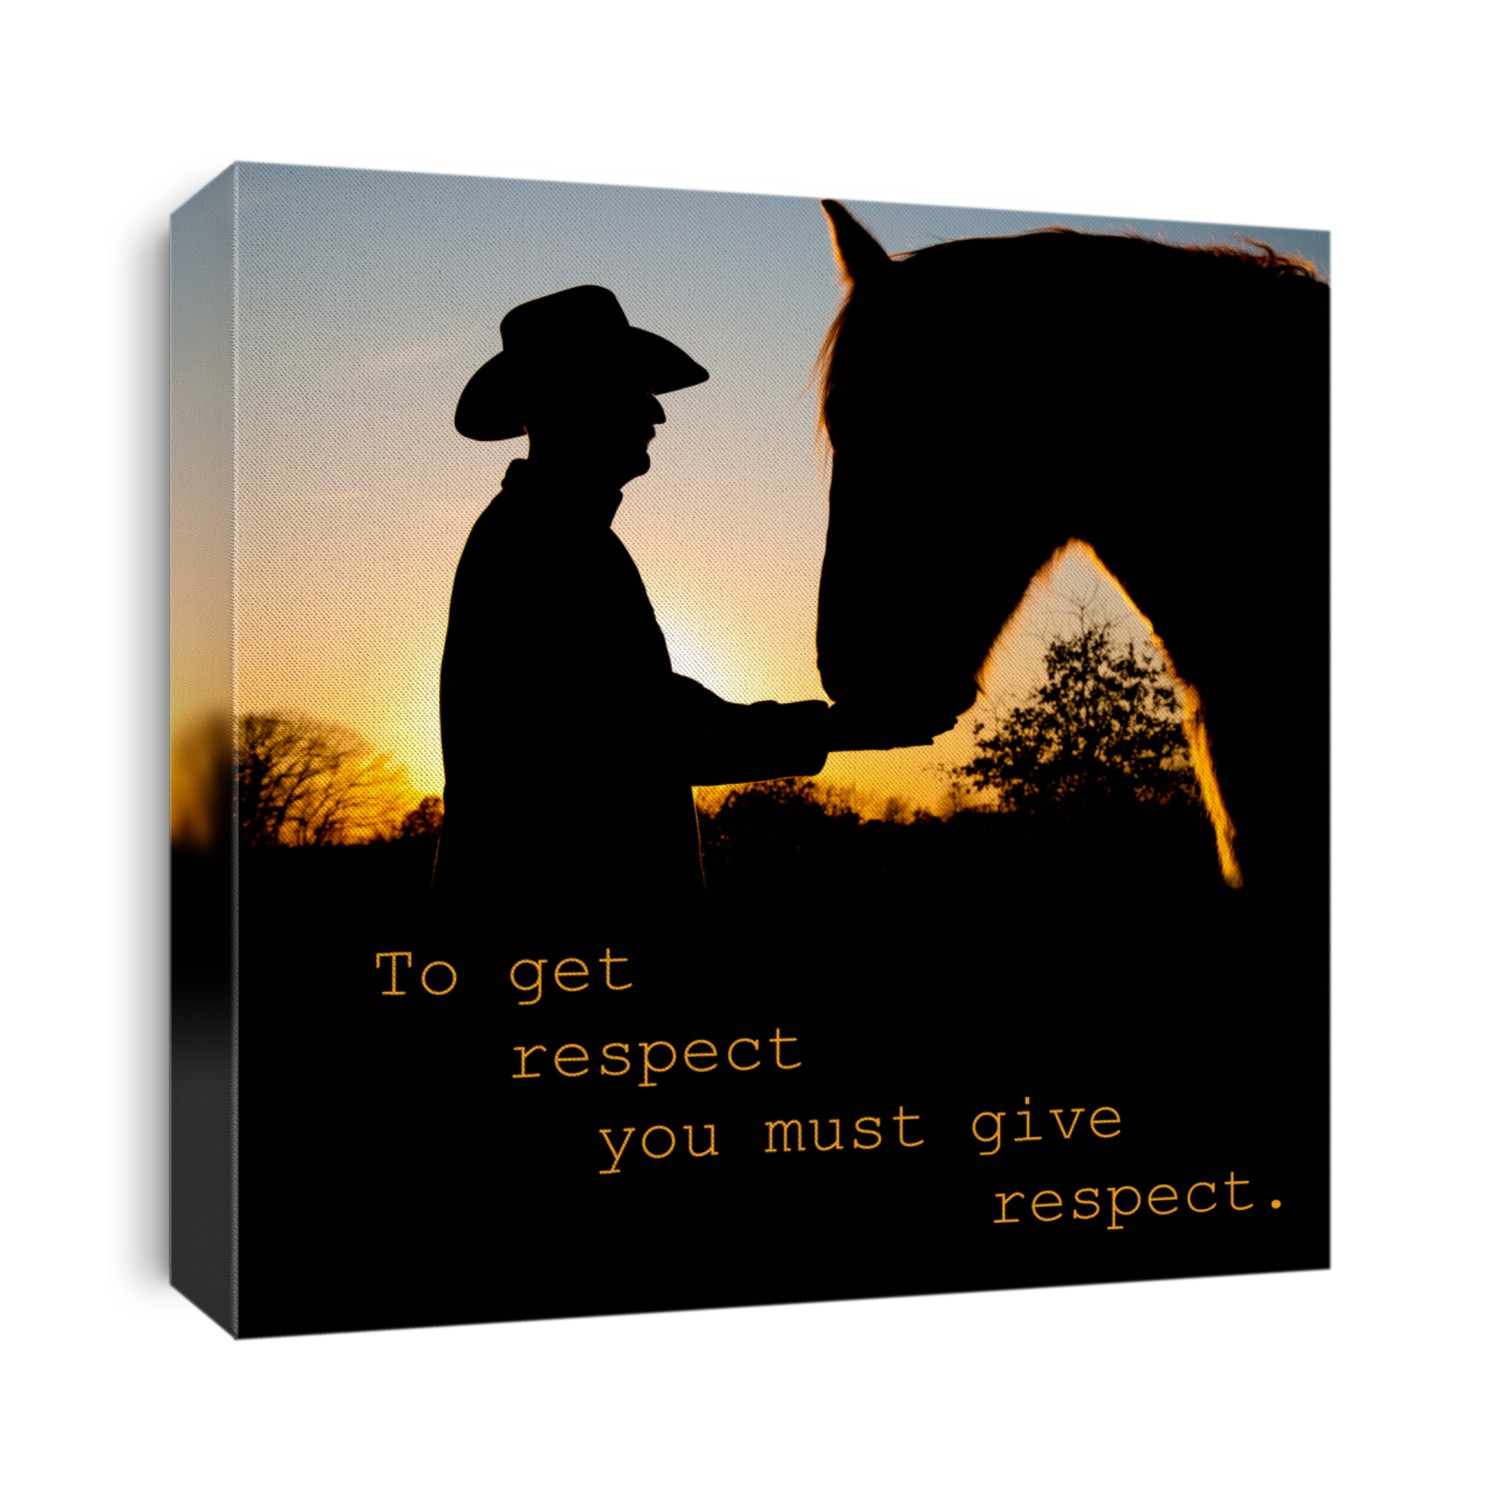 To get respect you must give respect - quote with a silhouette of a man and a horse face to face